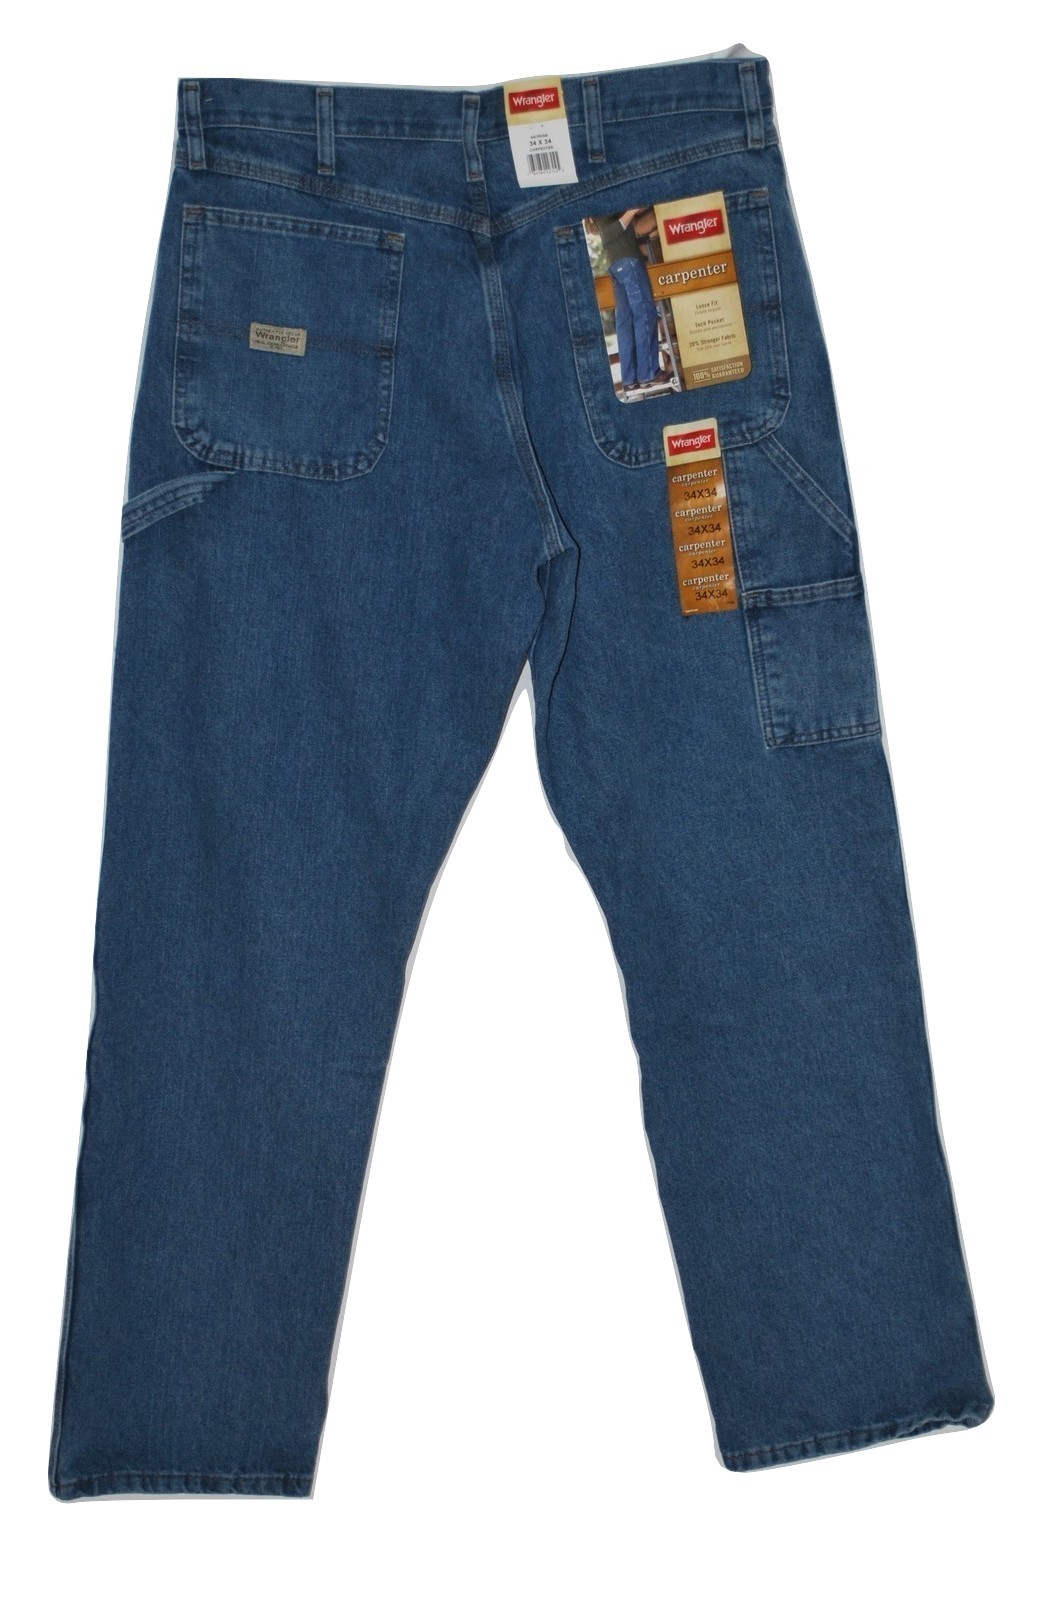 Wrangler Mens Relaxed Fit Carpenter Jeans Antique Stone 34x34 Mens Clothing 9789